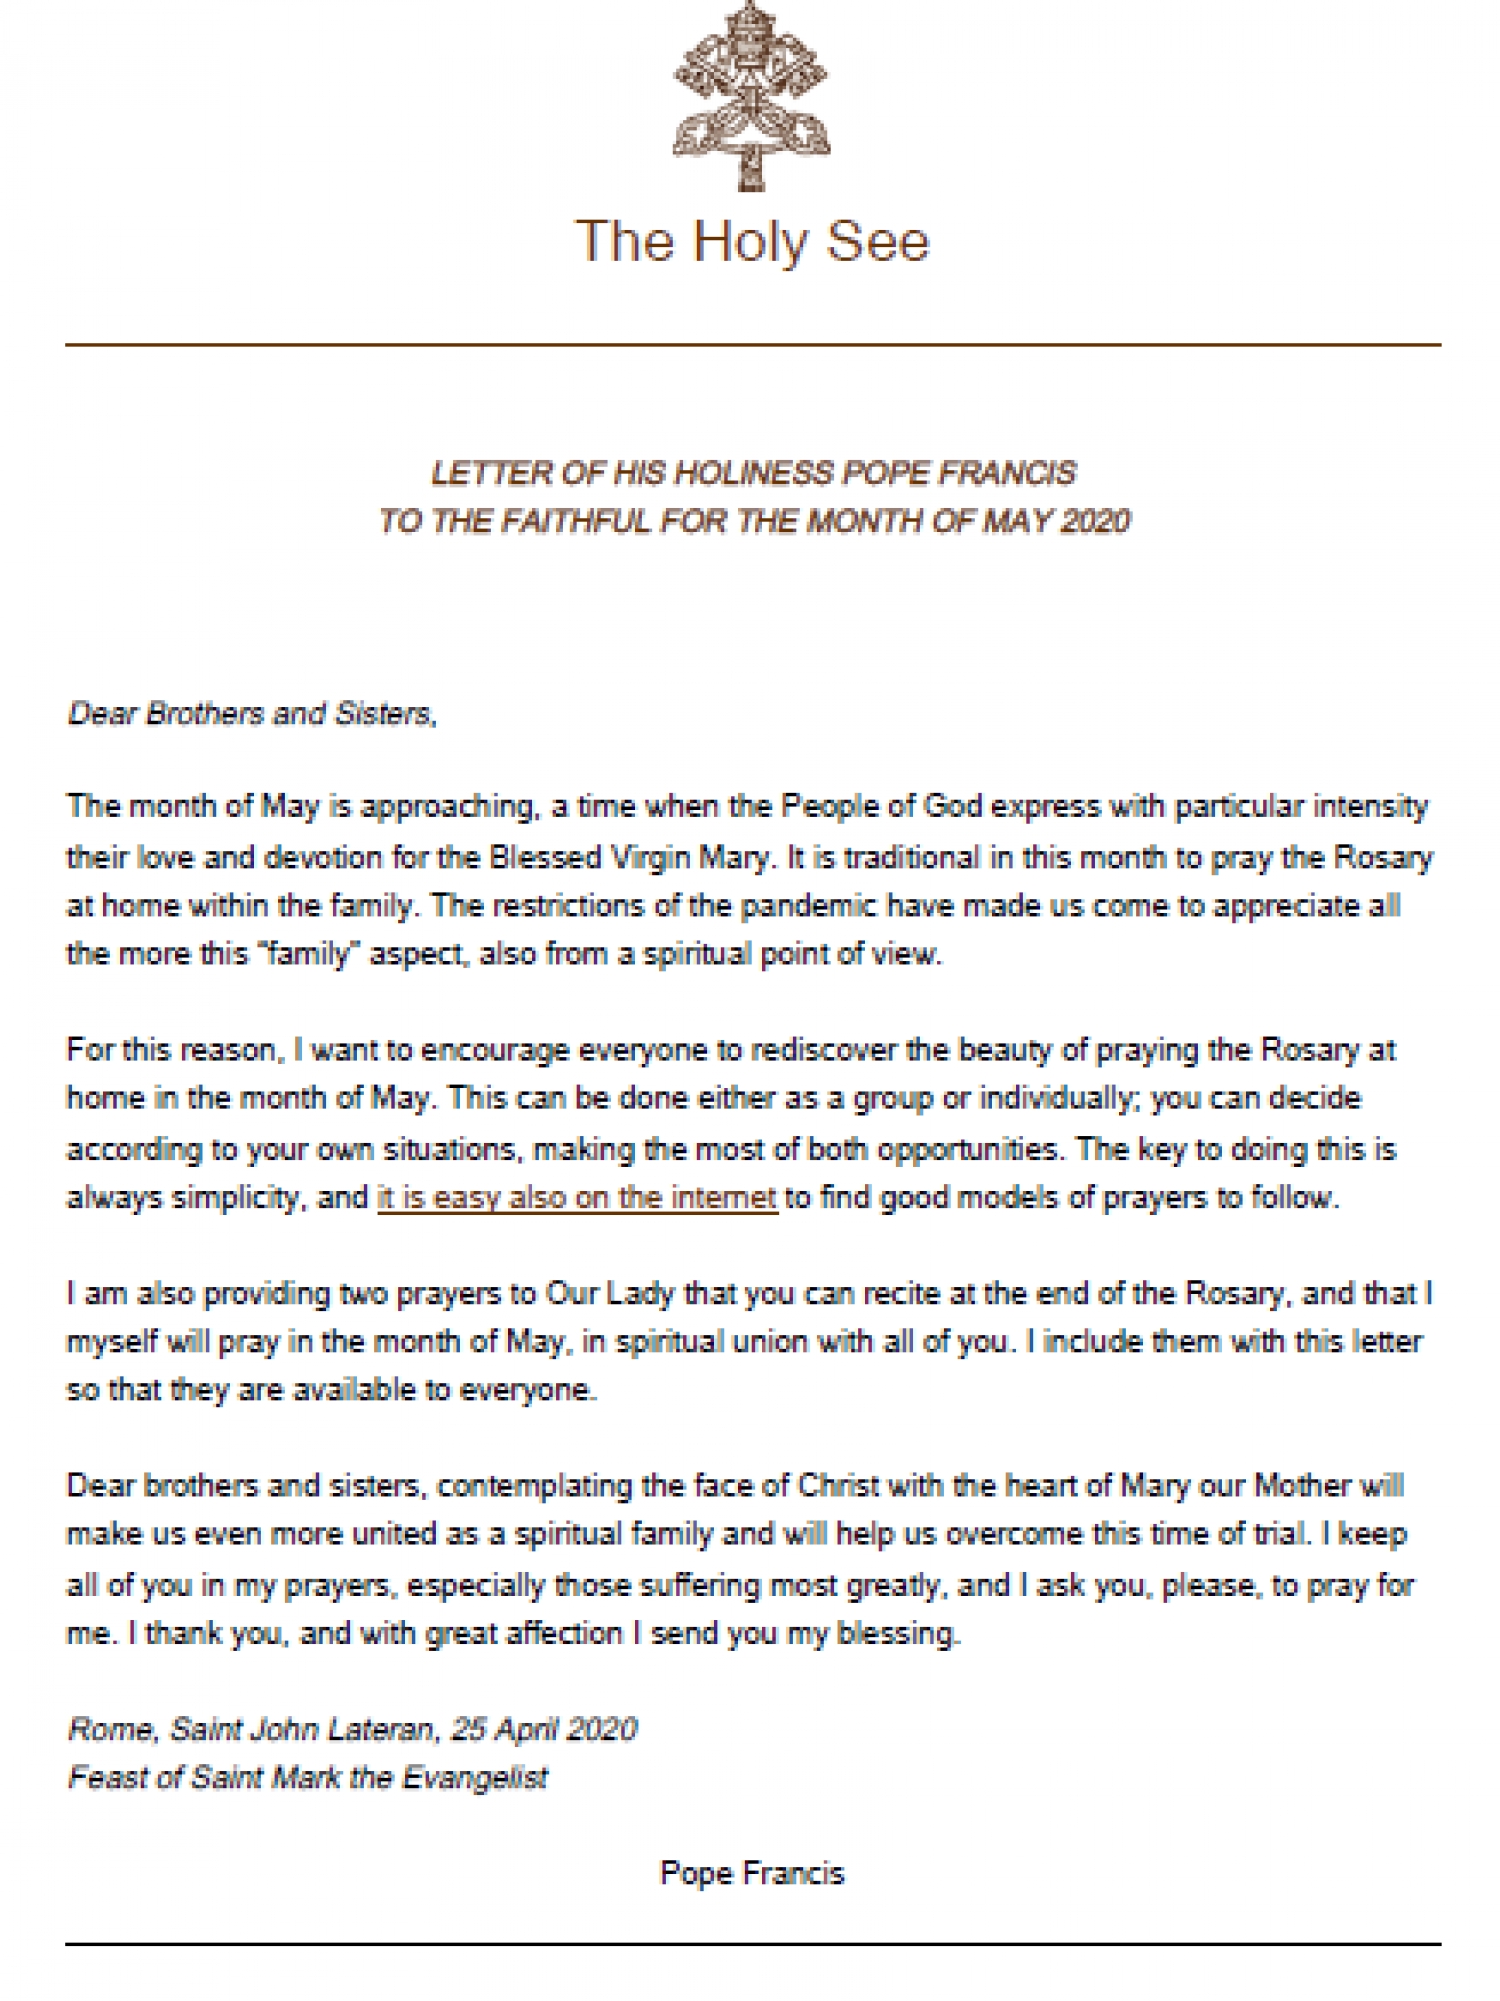 Letter of the Holy Father to the faithful for the month of May